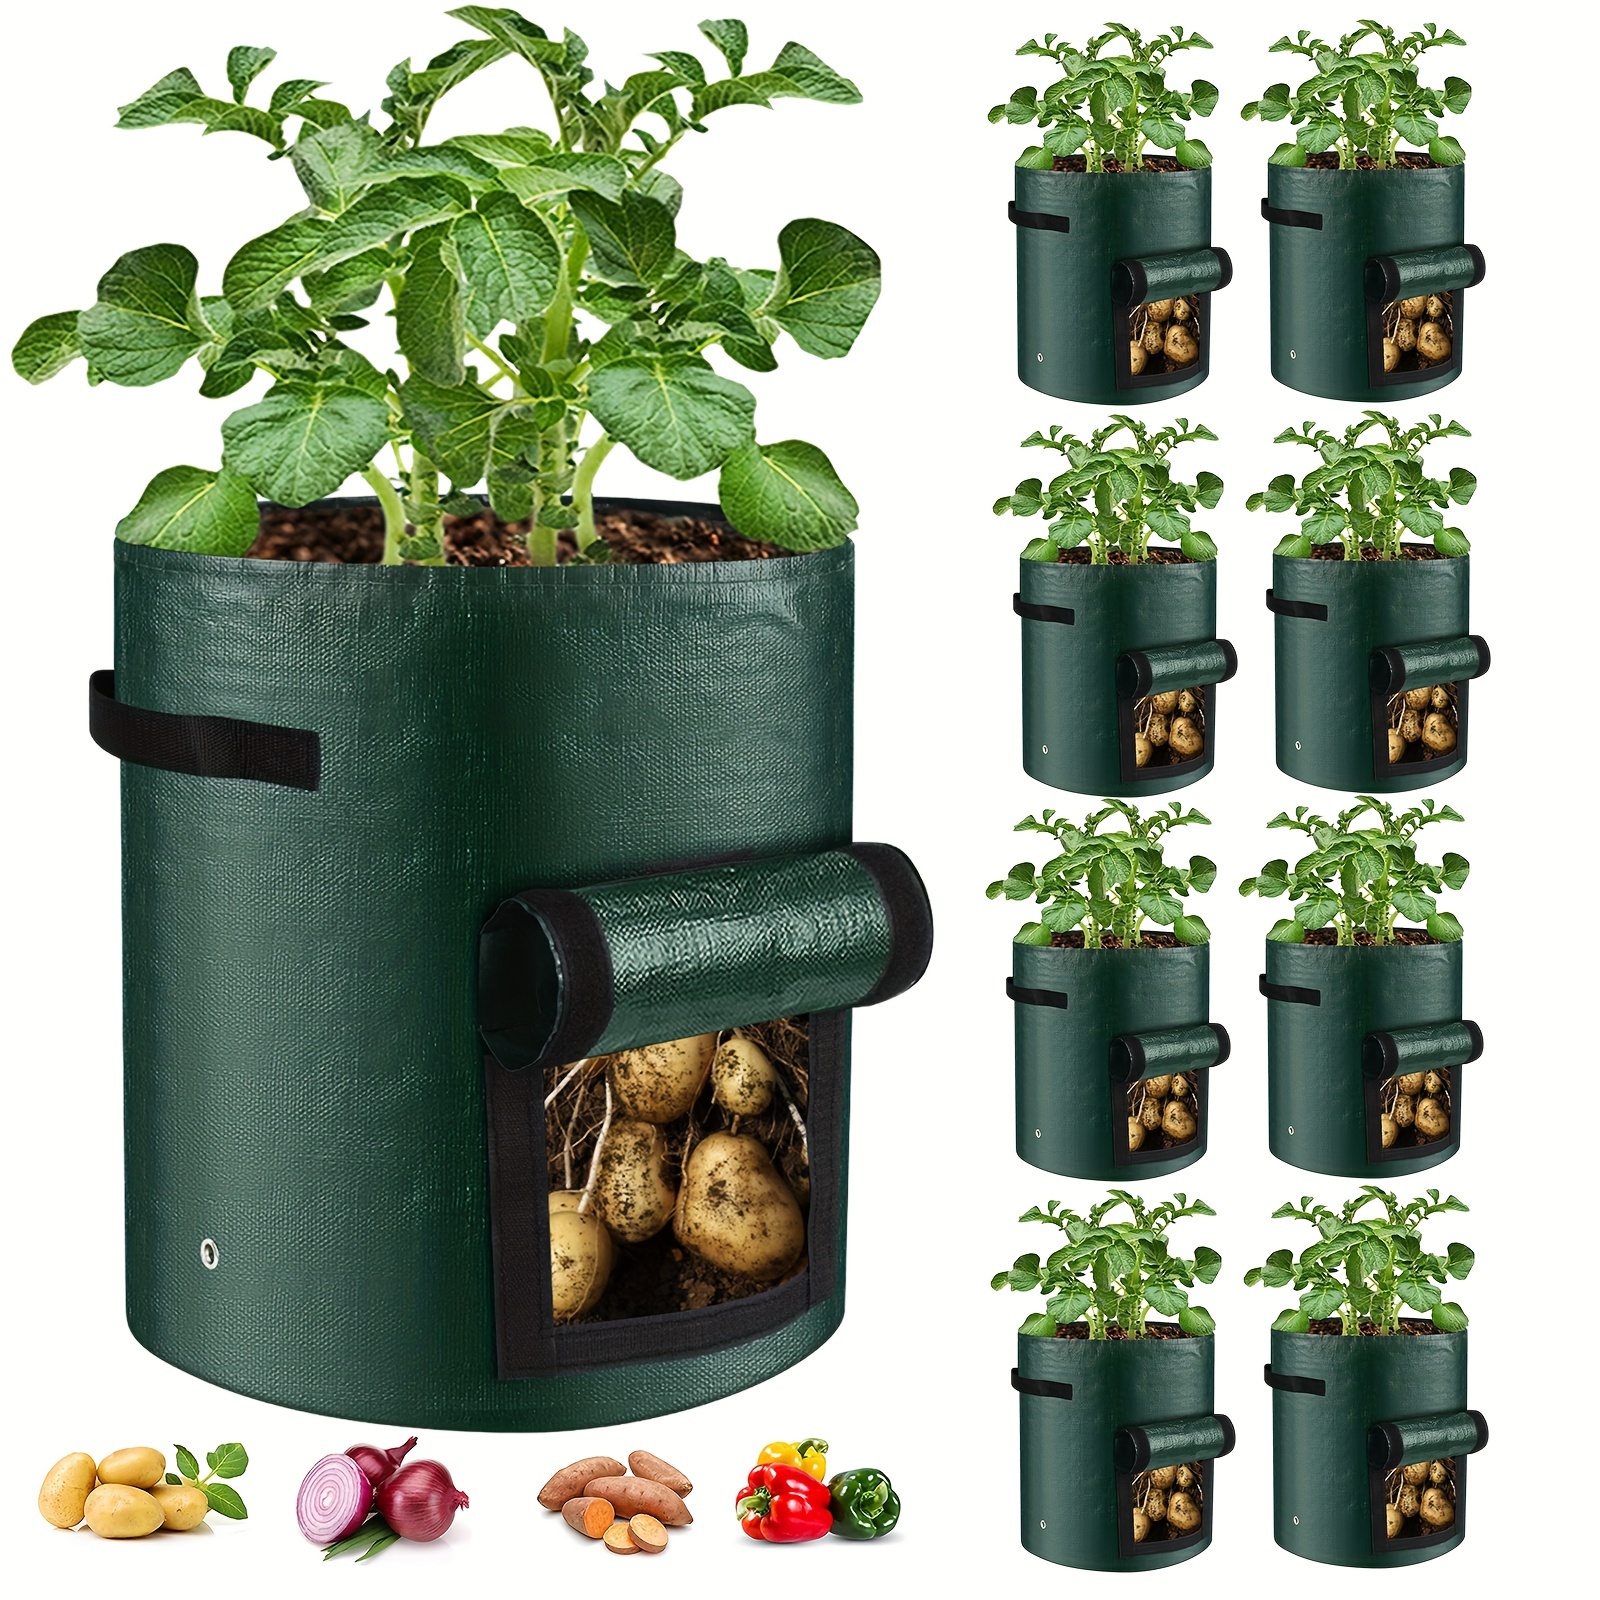 

10 Gallon Grow Bags, 8 Pack Durable Pe Fabric Pots With Flap And Handles, Green Planter Bags For Potato Vegetables Flowers Herbs Garden Outdoor, 17.7''x13.8'' Large For All Plants Growing